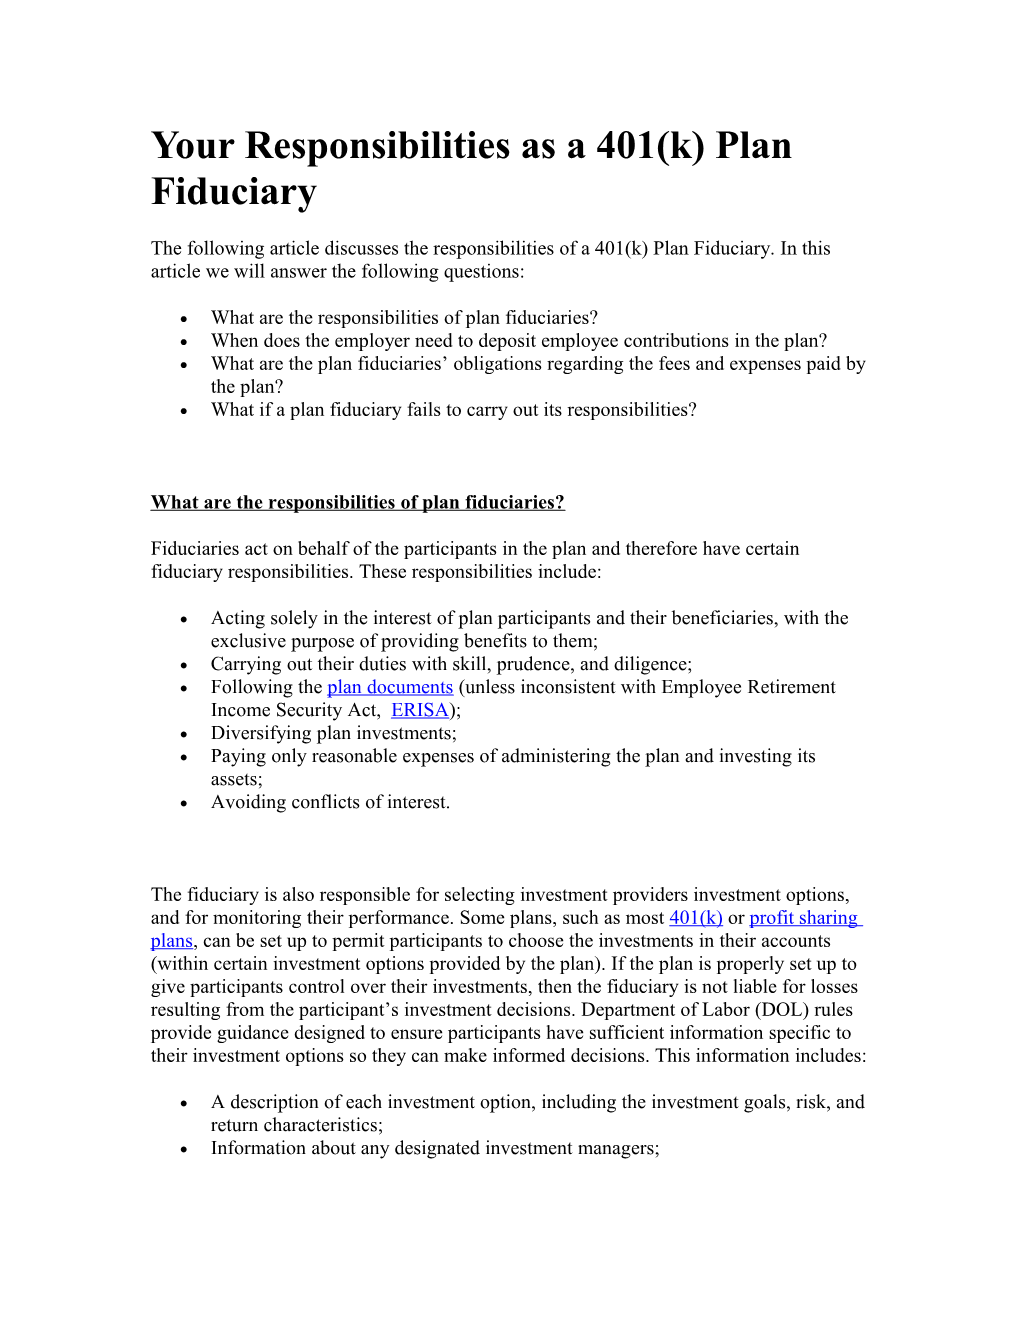 Your Responsibilities As a 401(K) Plan Fiduciary